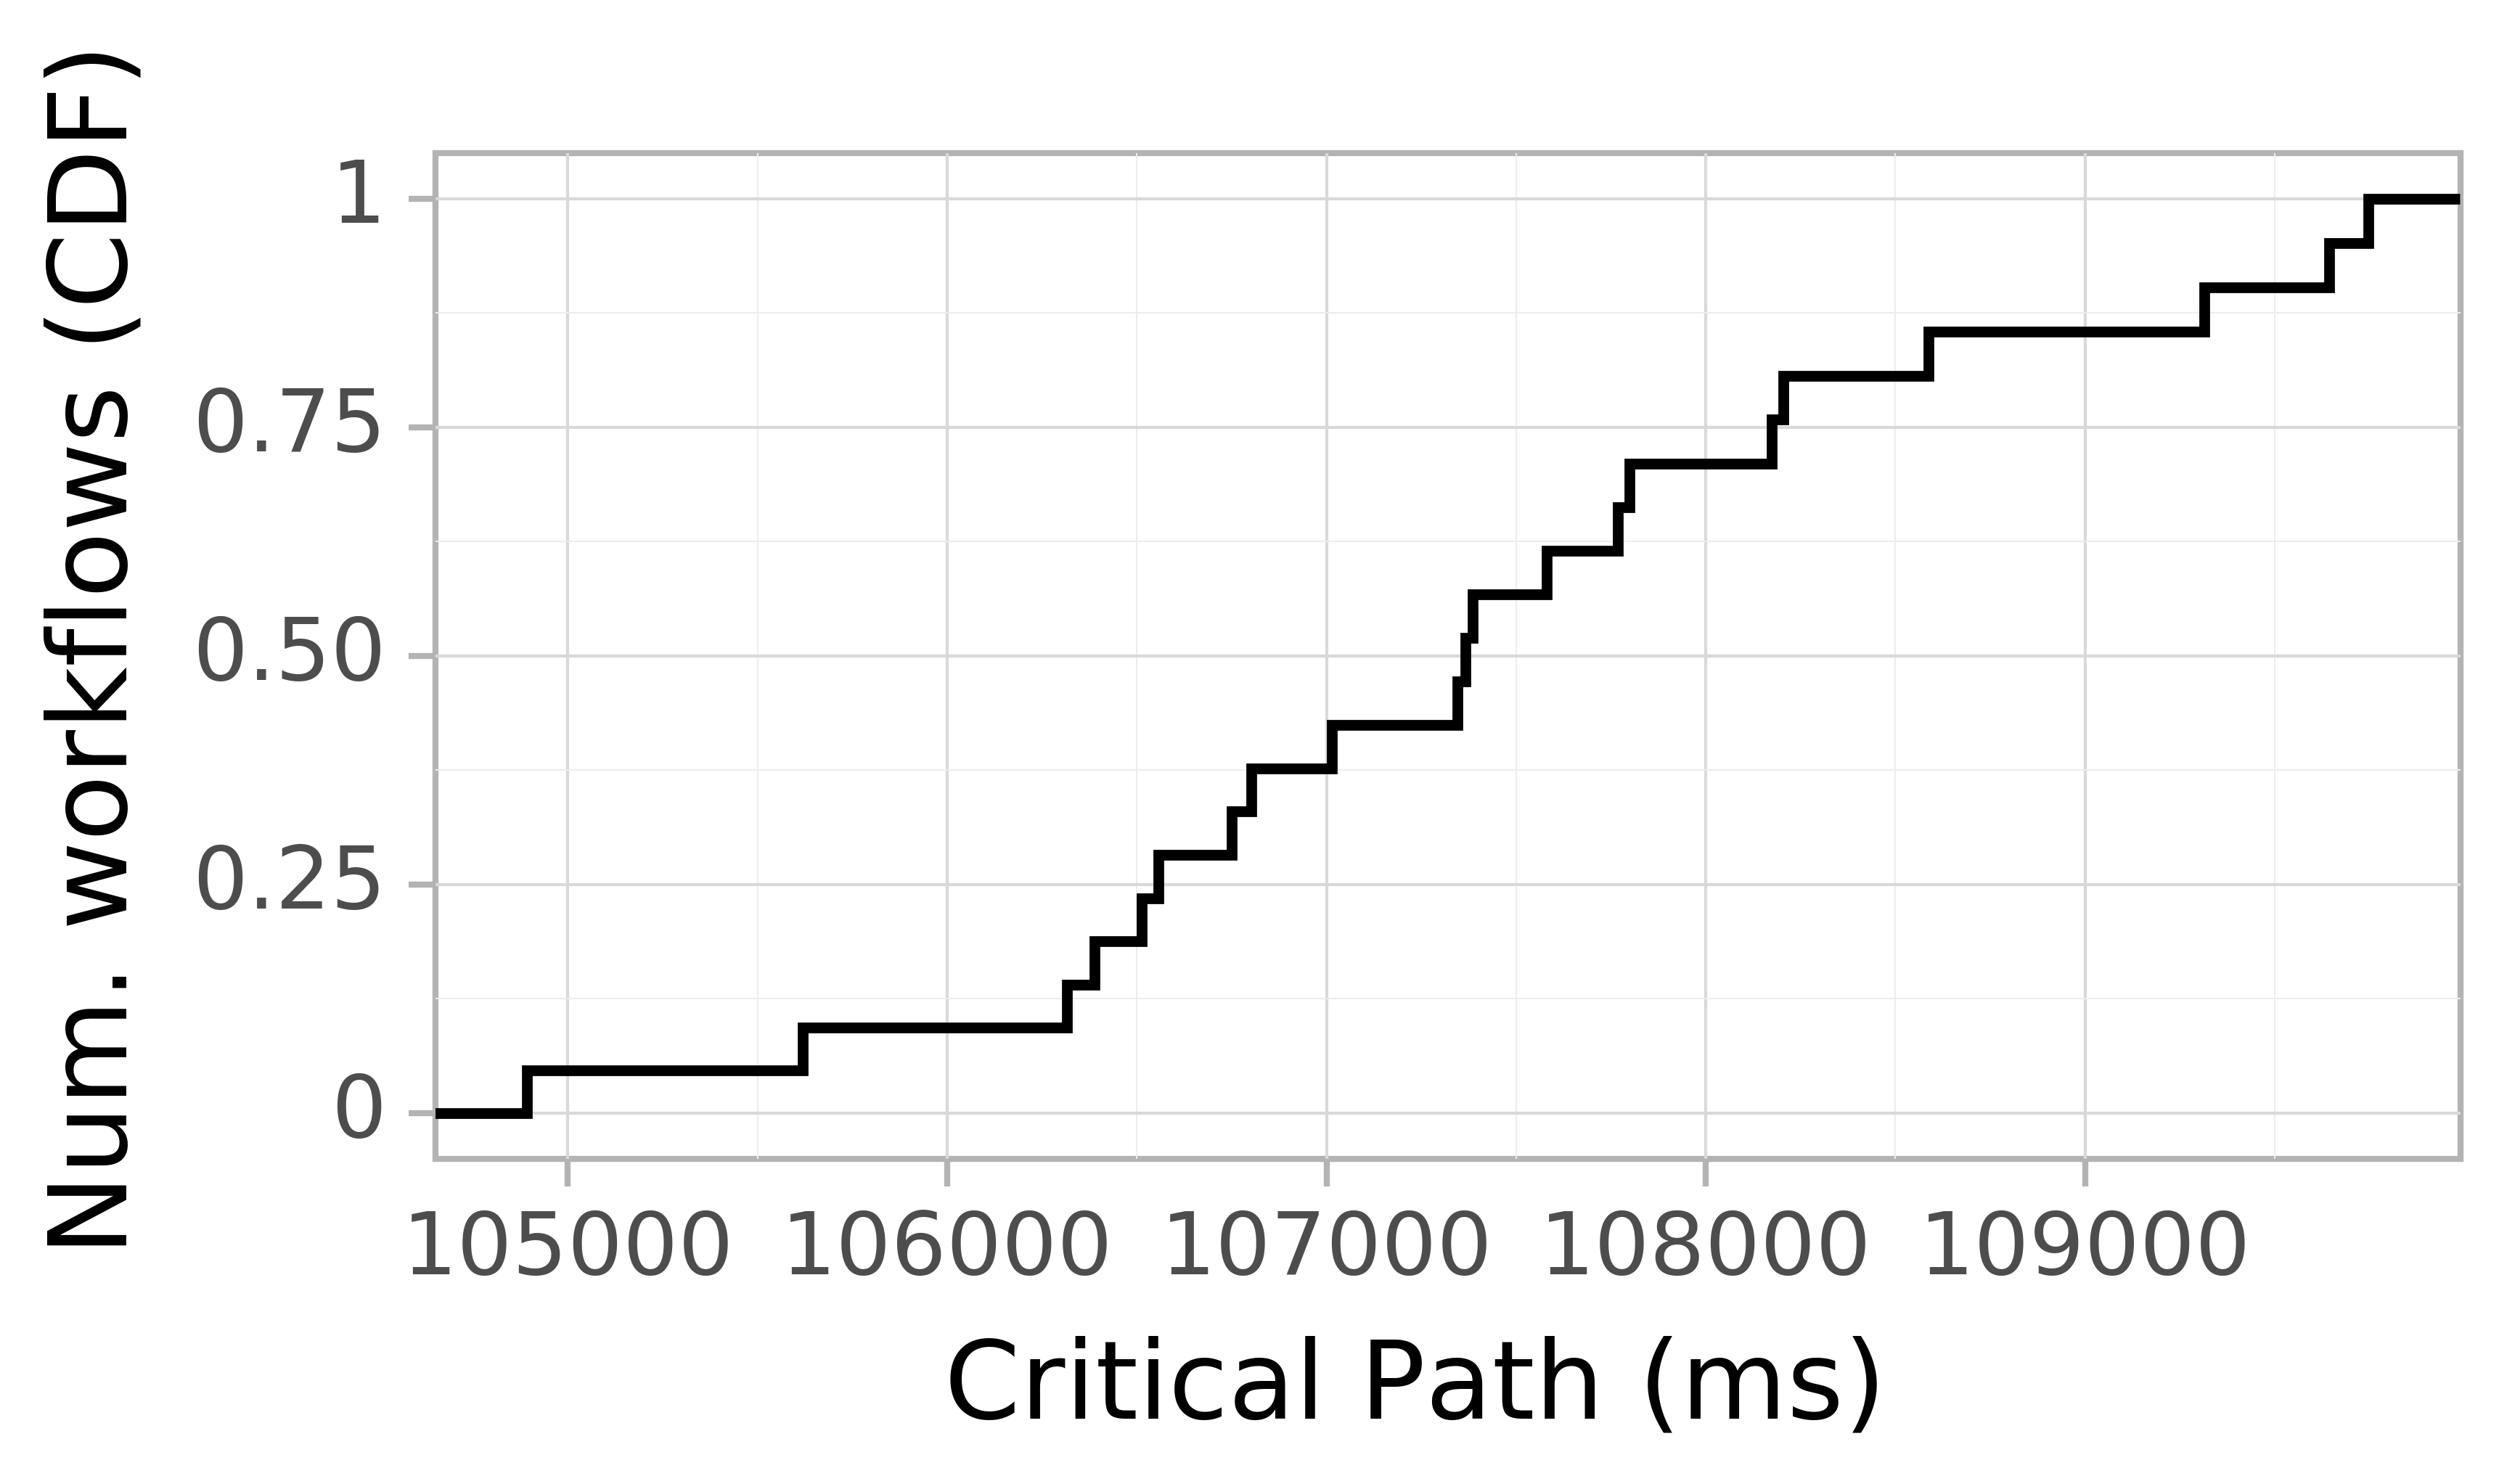 Job runtime CDF graph for the askalon-new_ee12 trace.